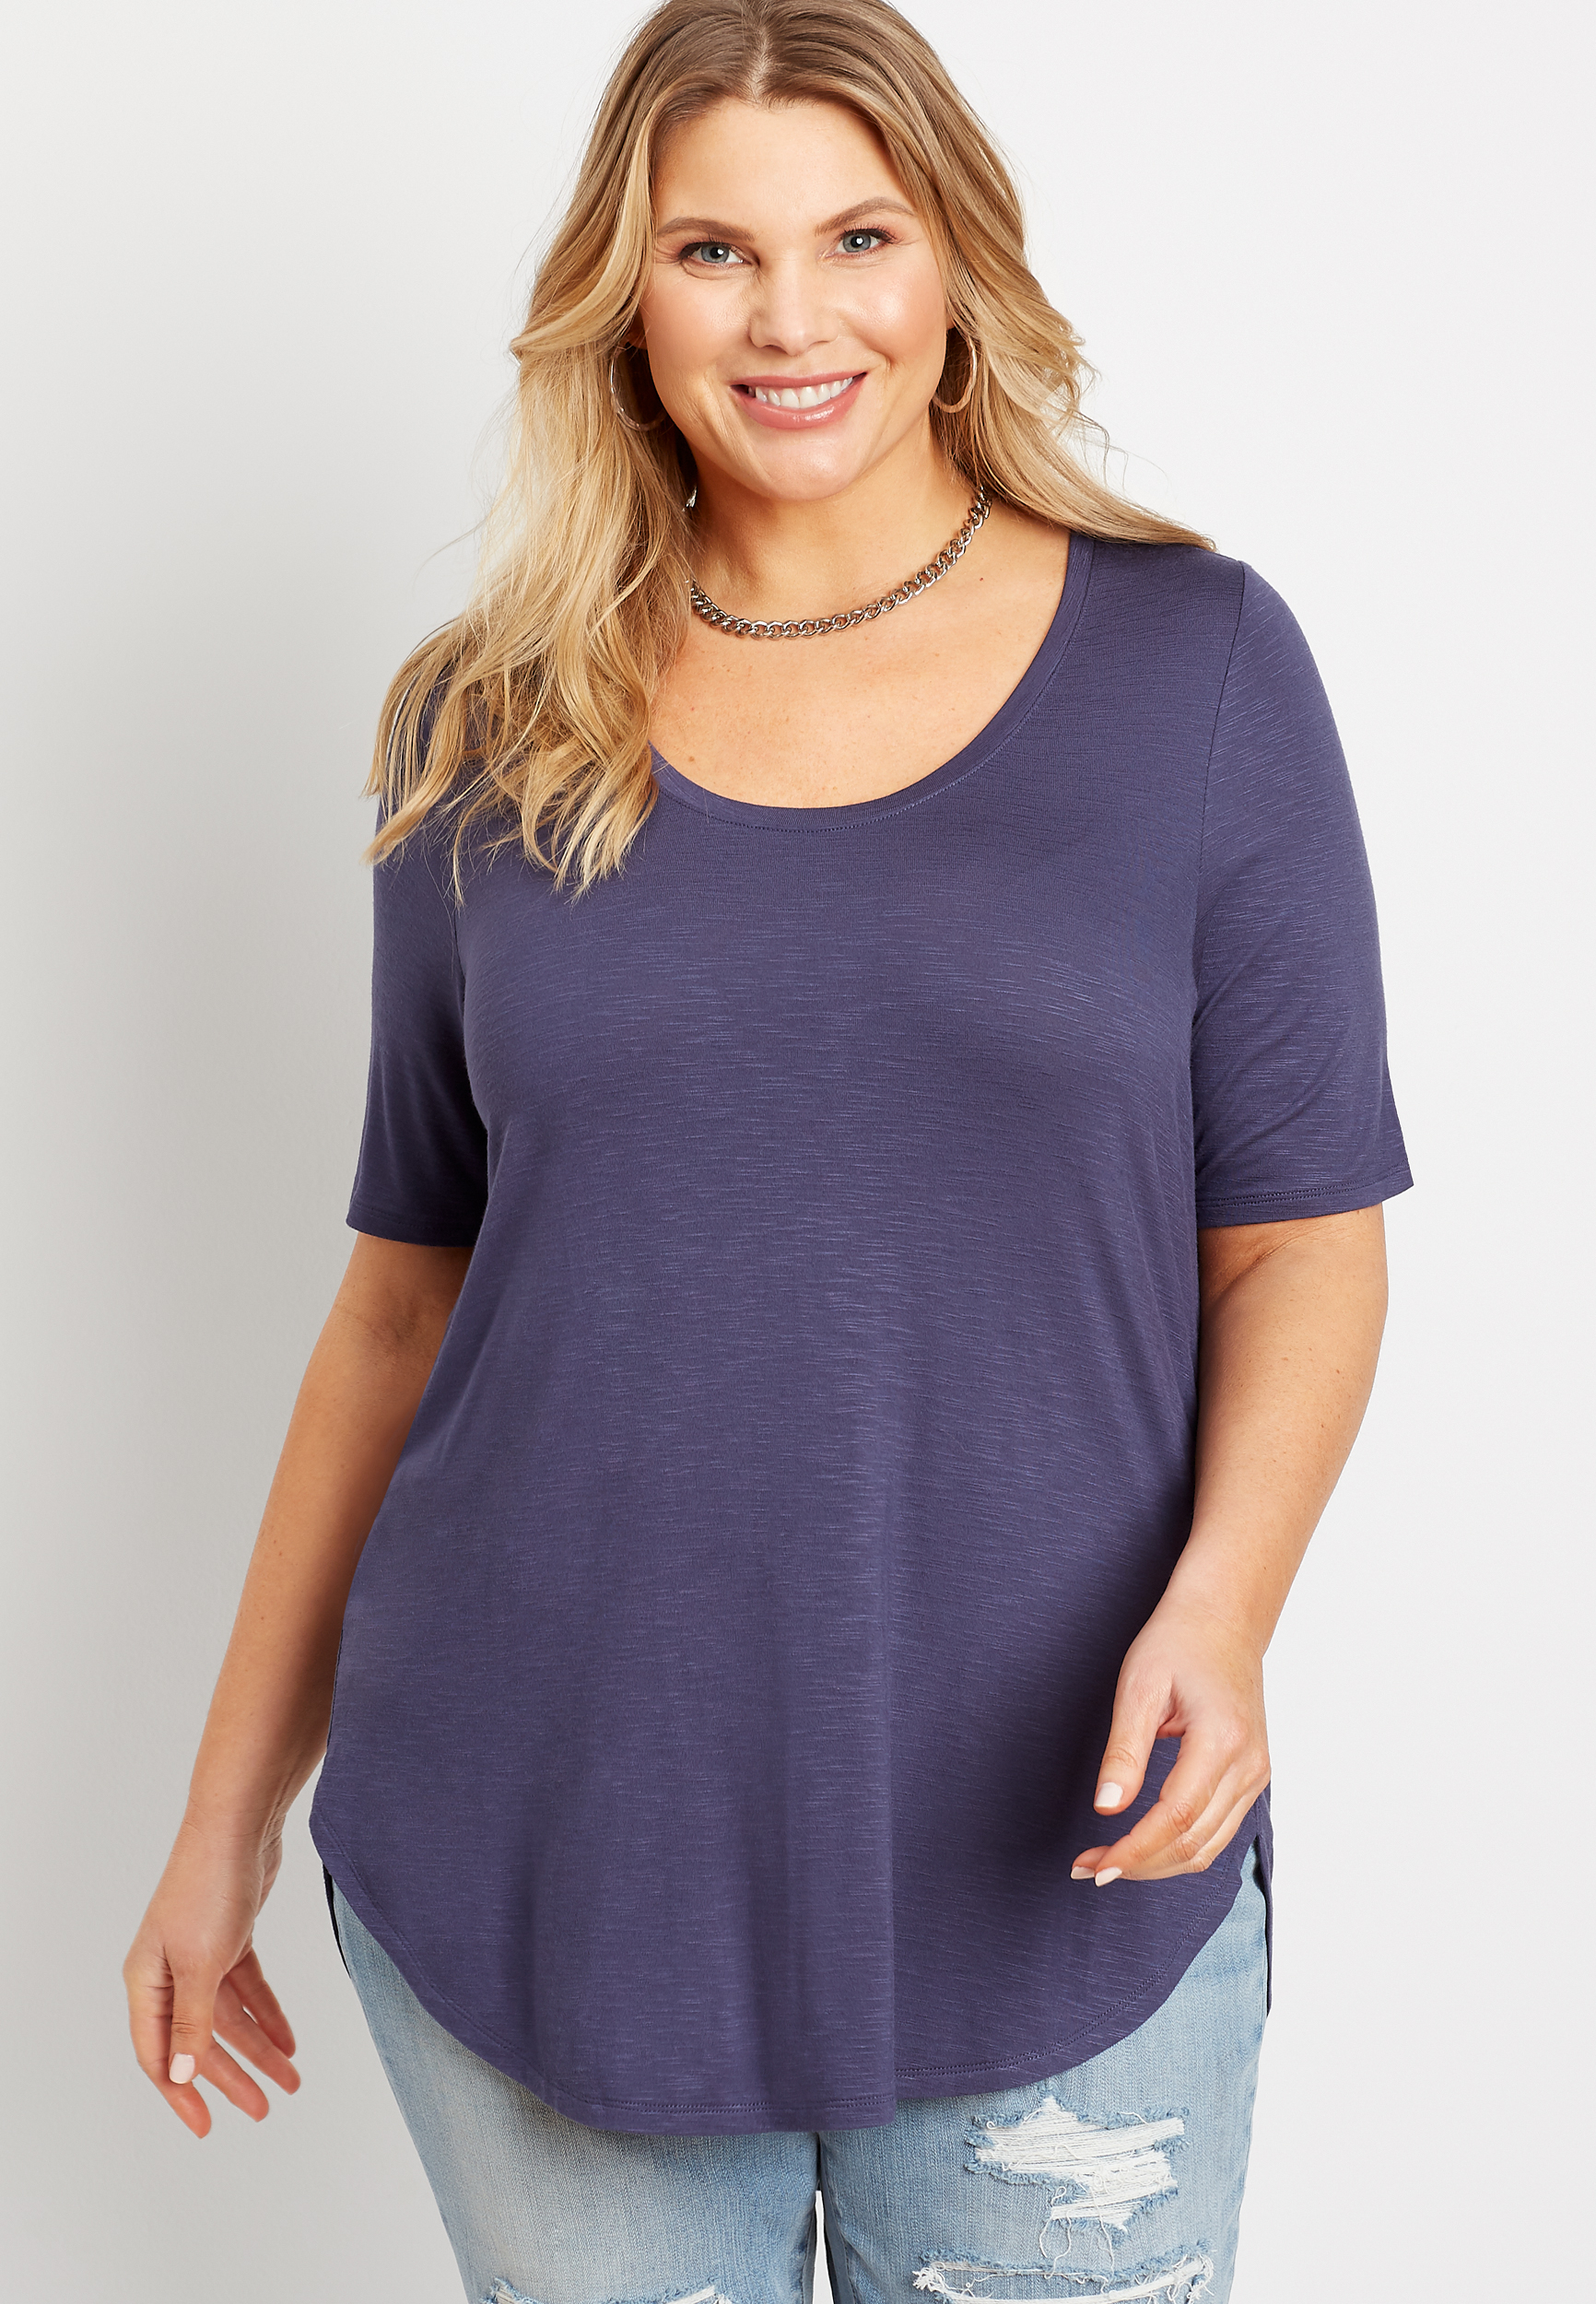 Plus Size 24/7 Solid Flawless Tee | maurices